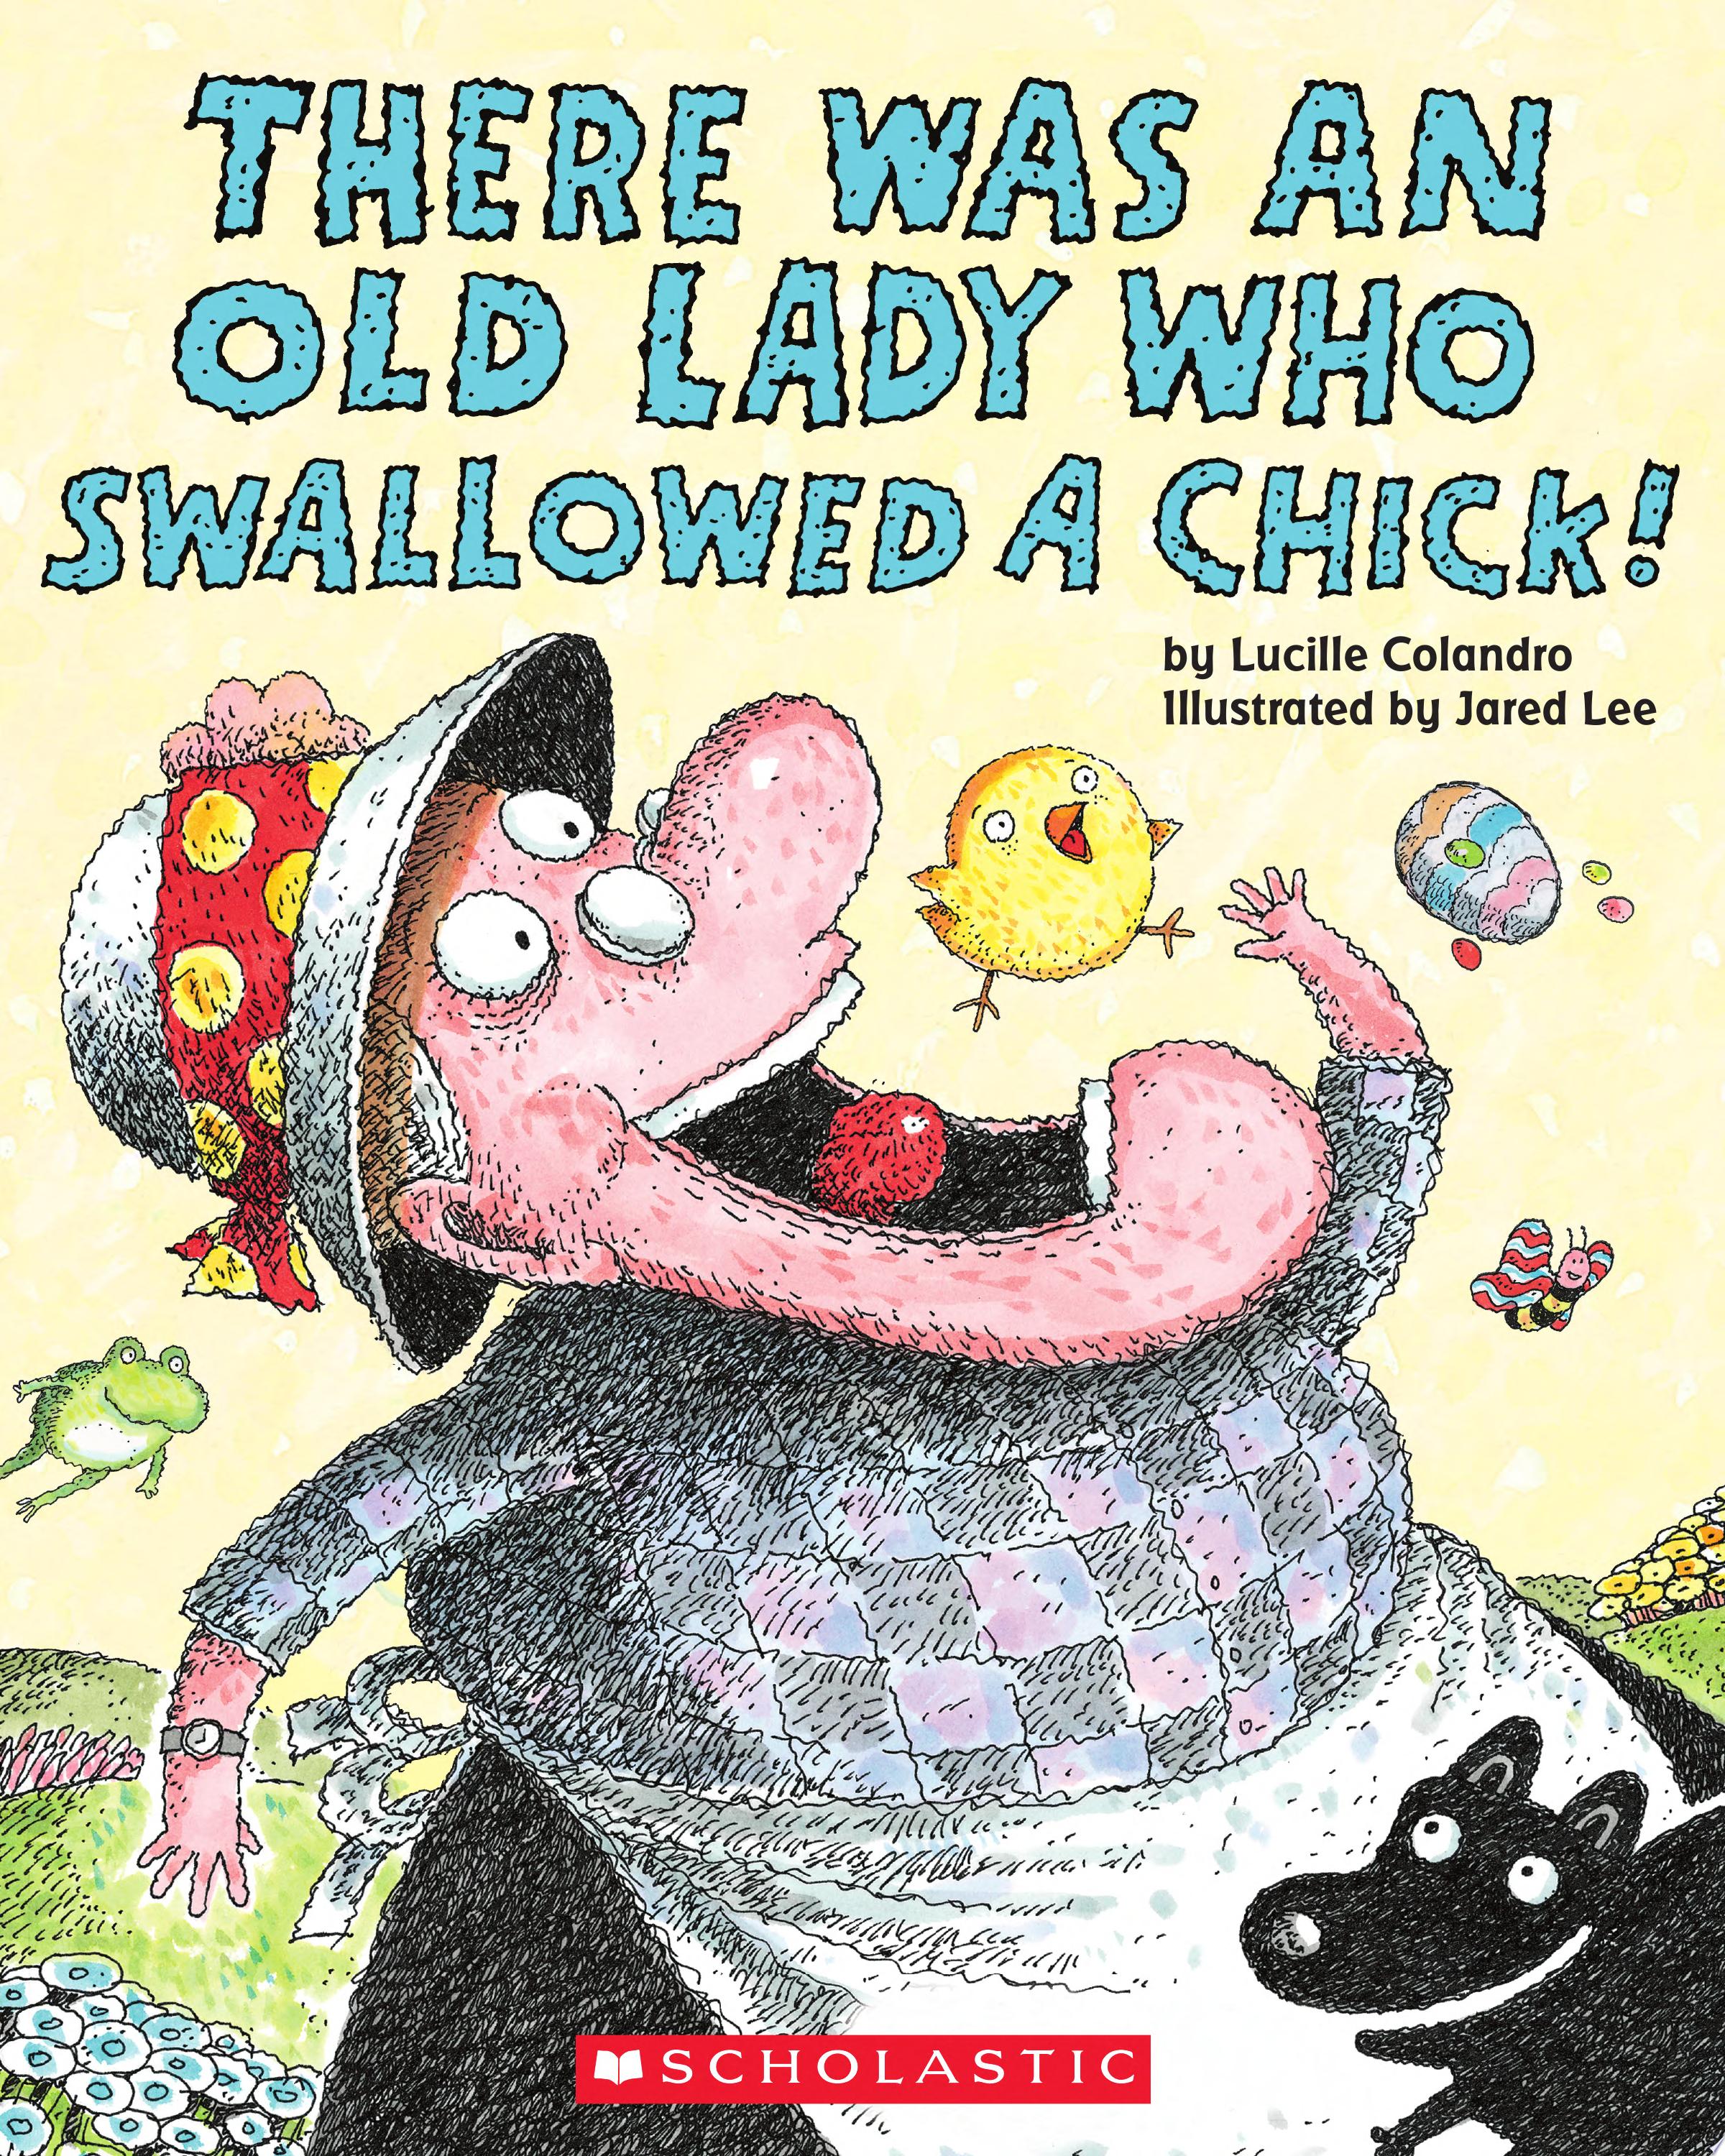 Image for "There was an Old Lady who Swallowed a Chick!"